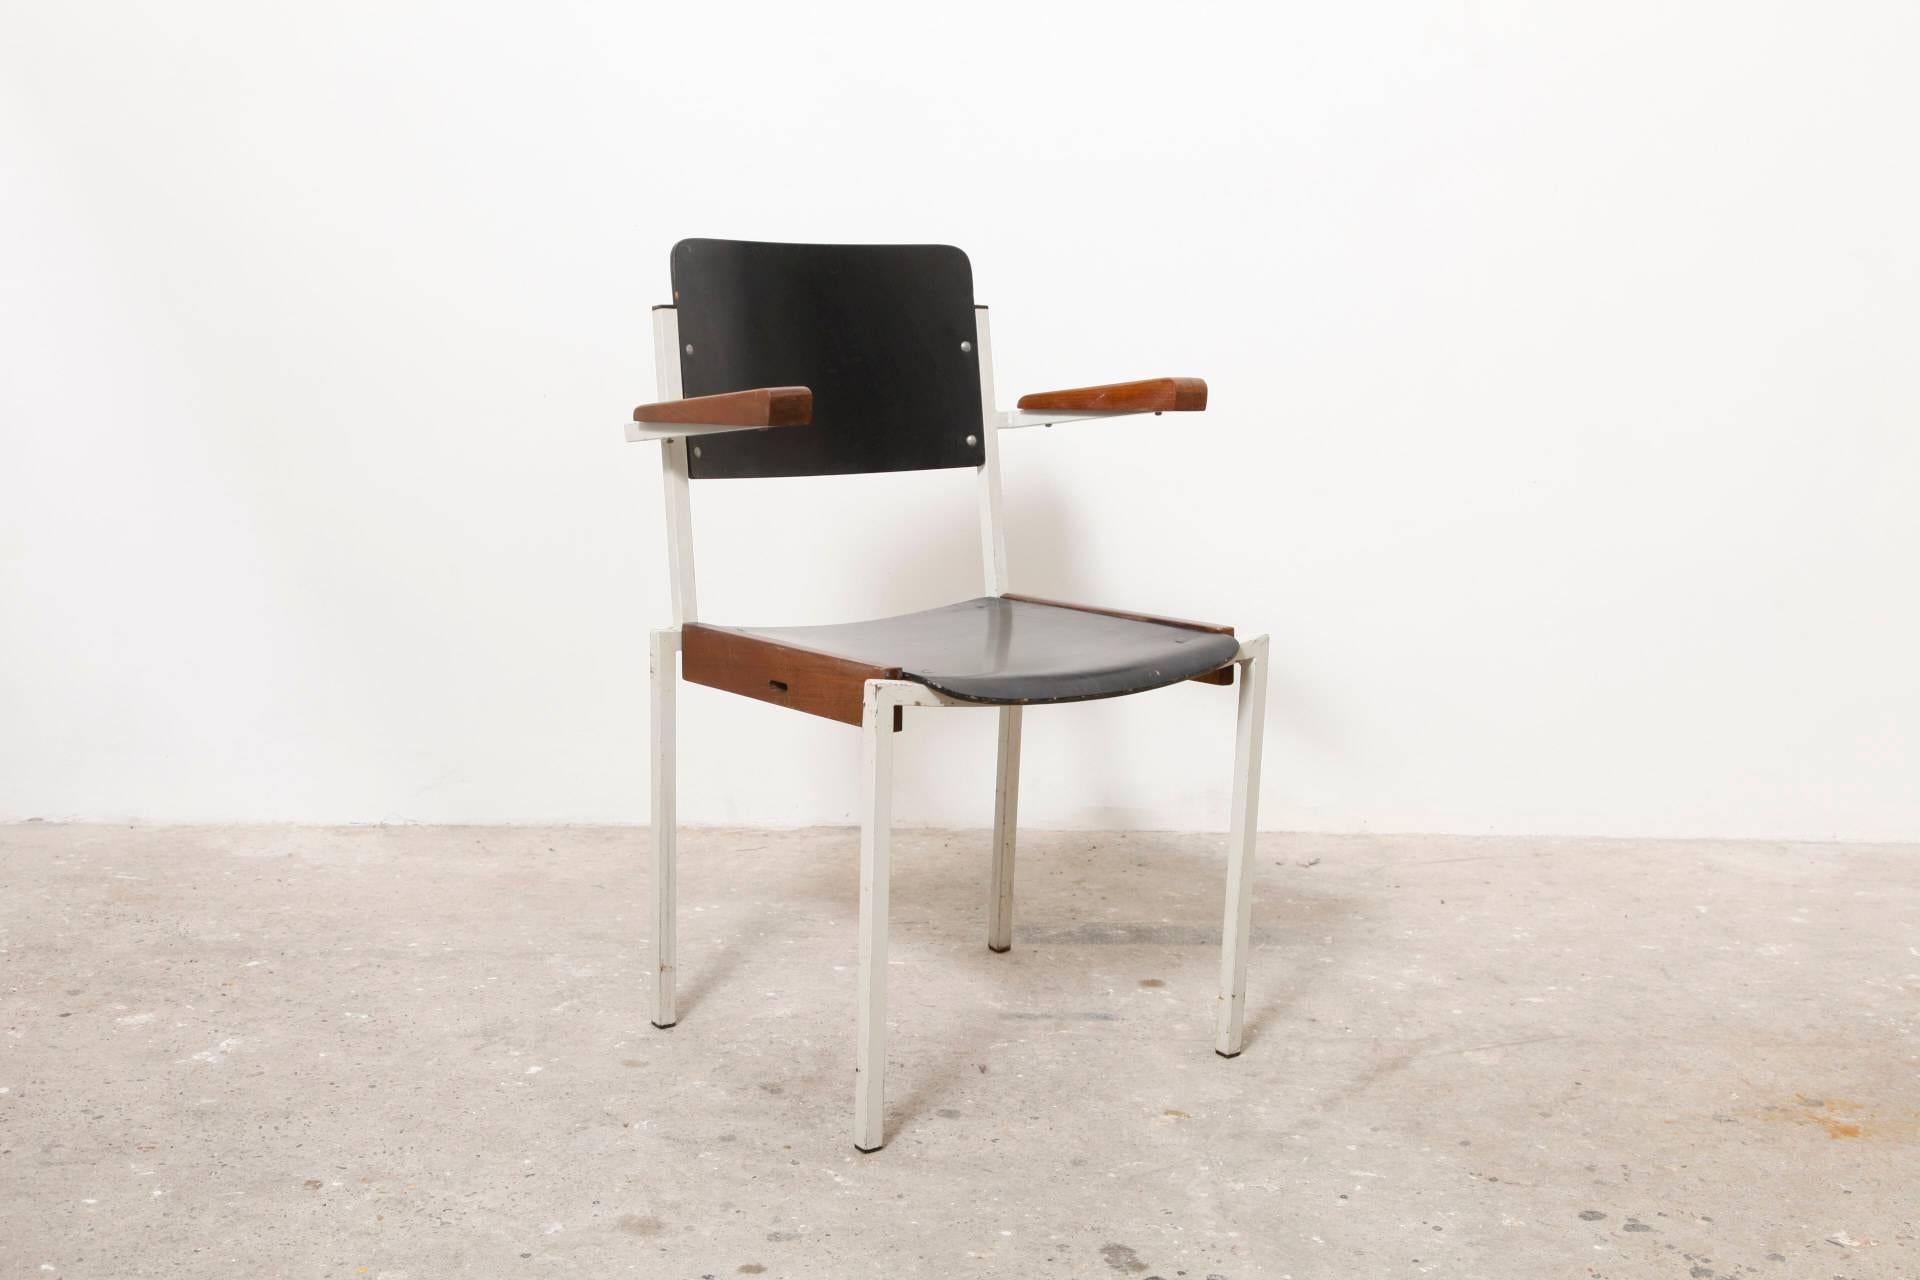 These chairs designed by W H. Gispen and were made in the 1950s for Riemersma.
 
The backs of the chairs are made of black lacquered wood, the arm-rests are naturally teakwood and have a rough patina look, the frame is enamaled metal, executed in a